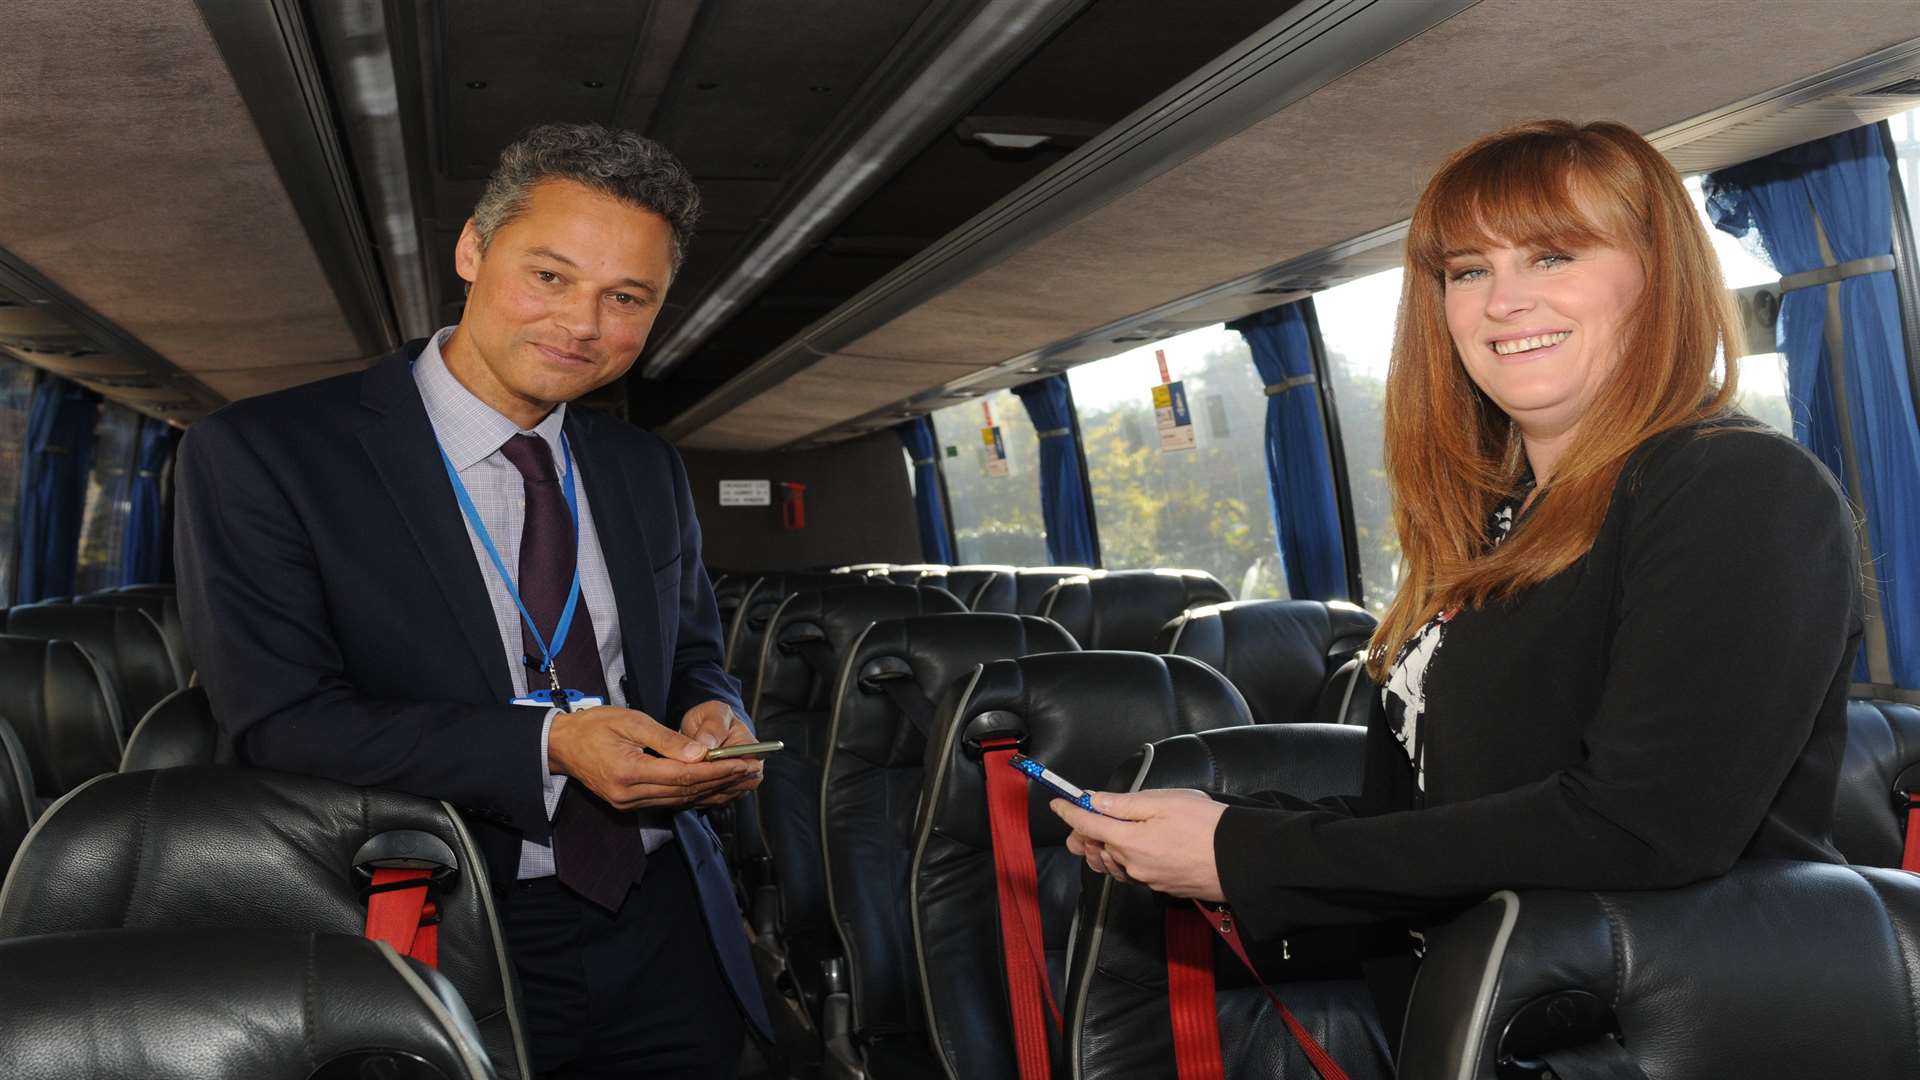 MP Kelly Tollhurst and Icomera sales director Peter Kingsland use the firm's wifi on a Chalkwell coach